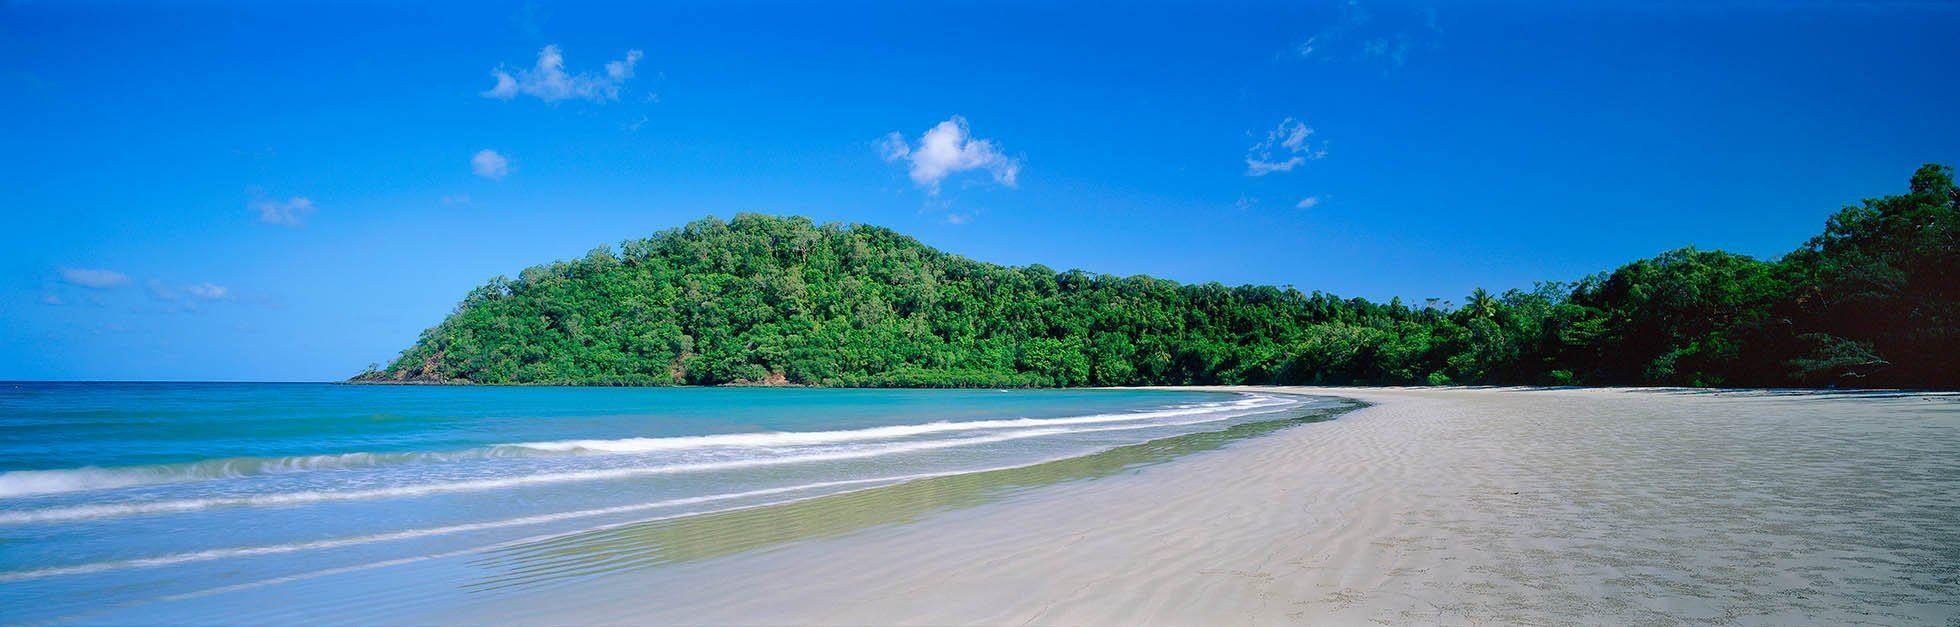 A morning view of a beutiful long beach with clear blue color water in the foreground, and a wide series of fresh green trees, Cape Tribulation - The Daintree   